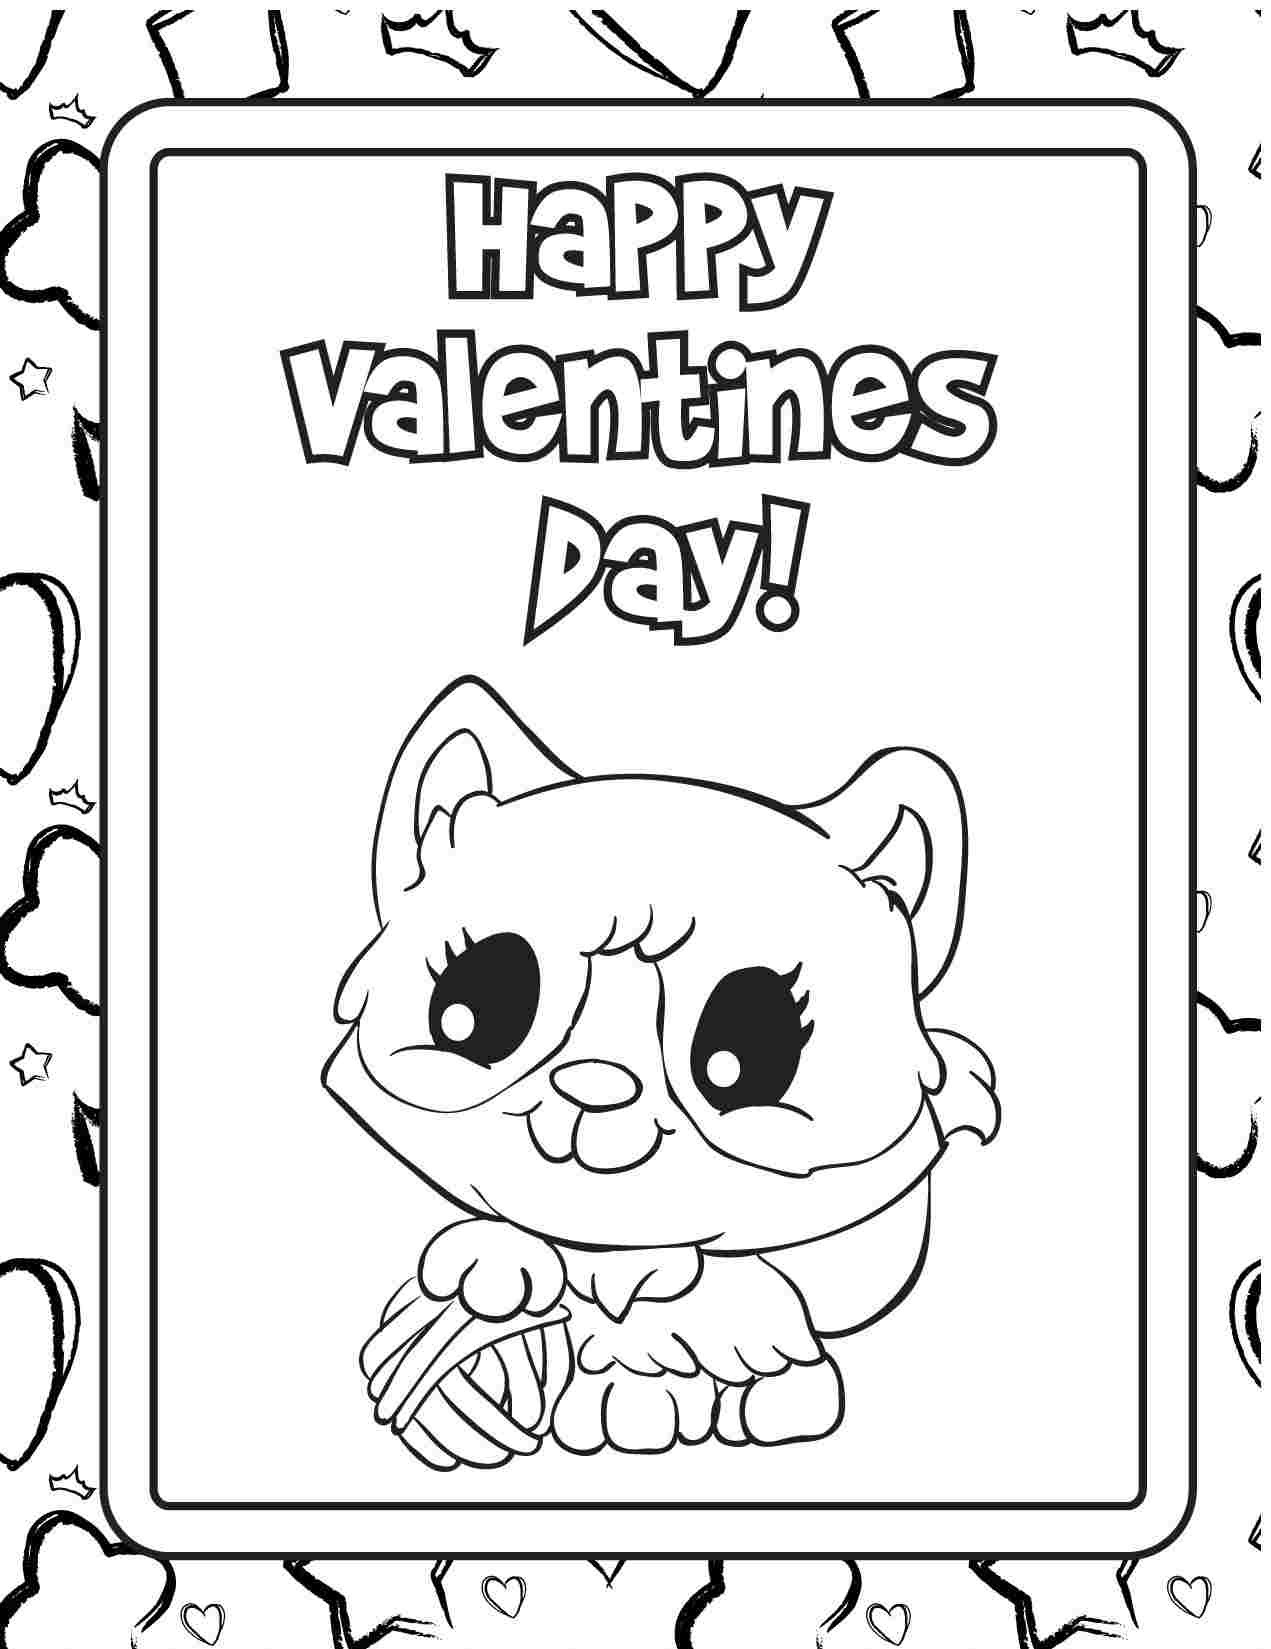 Free Valentine s Day Coloring Pages 101 Coloring